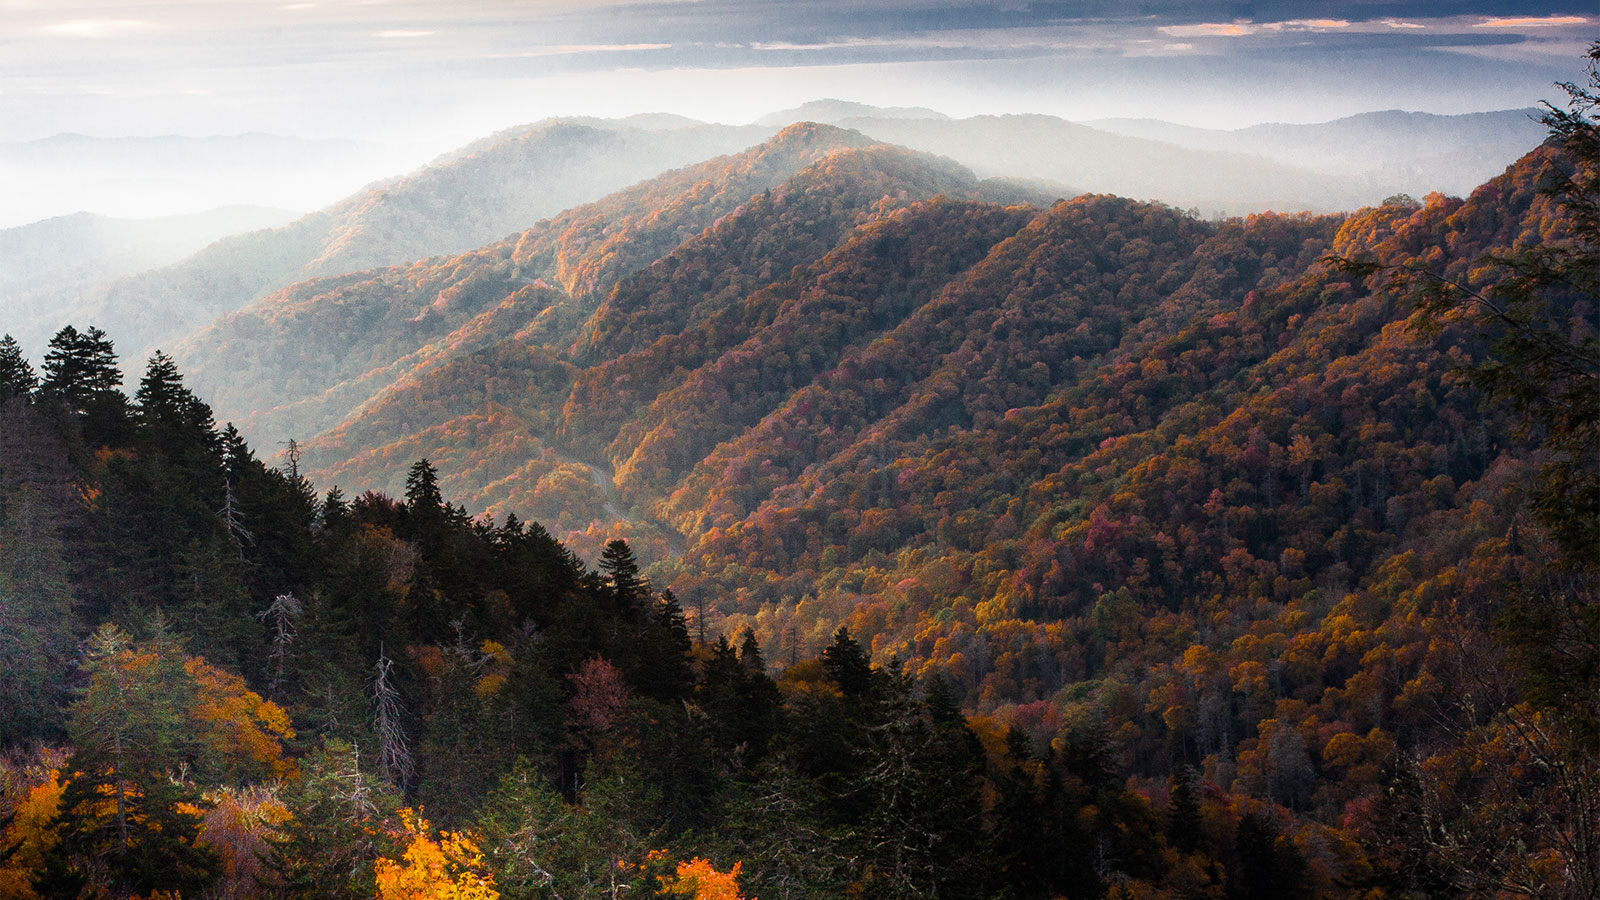 A view of the Smoky Mountains with fog in the distance